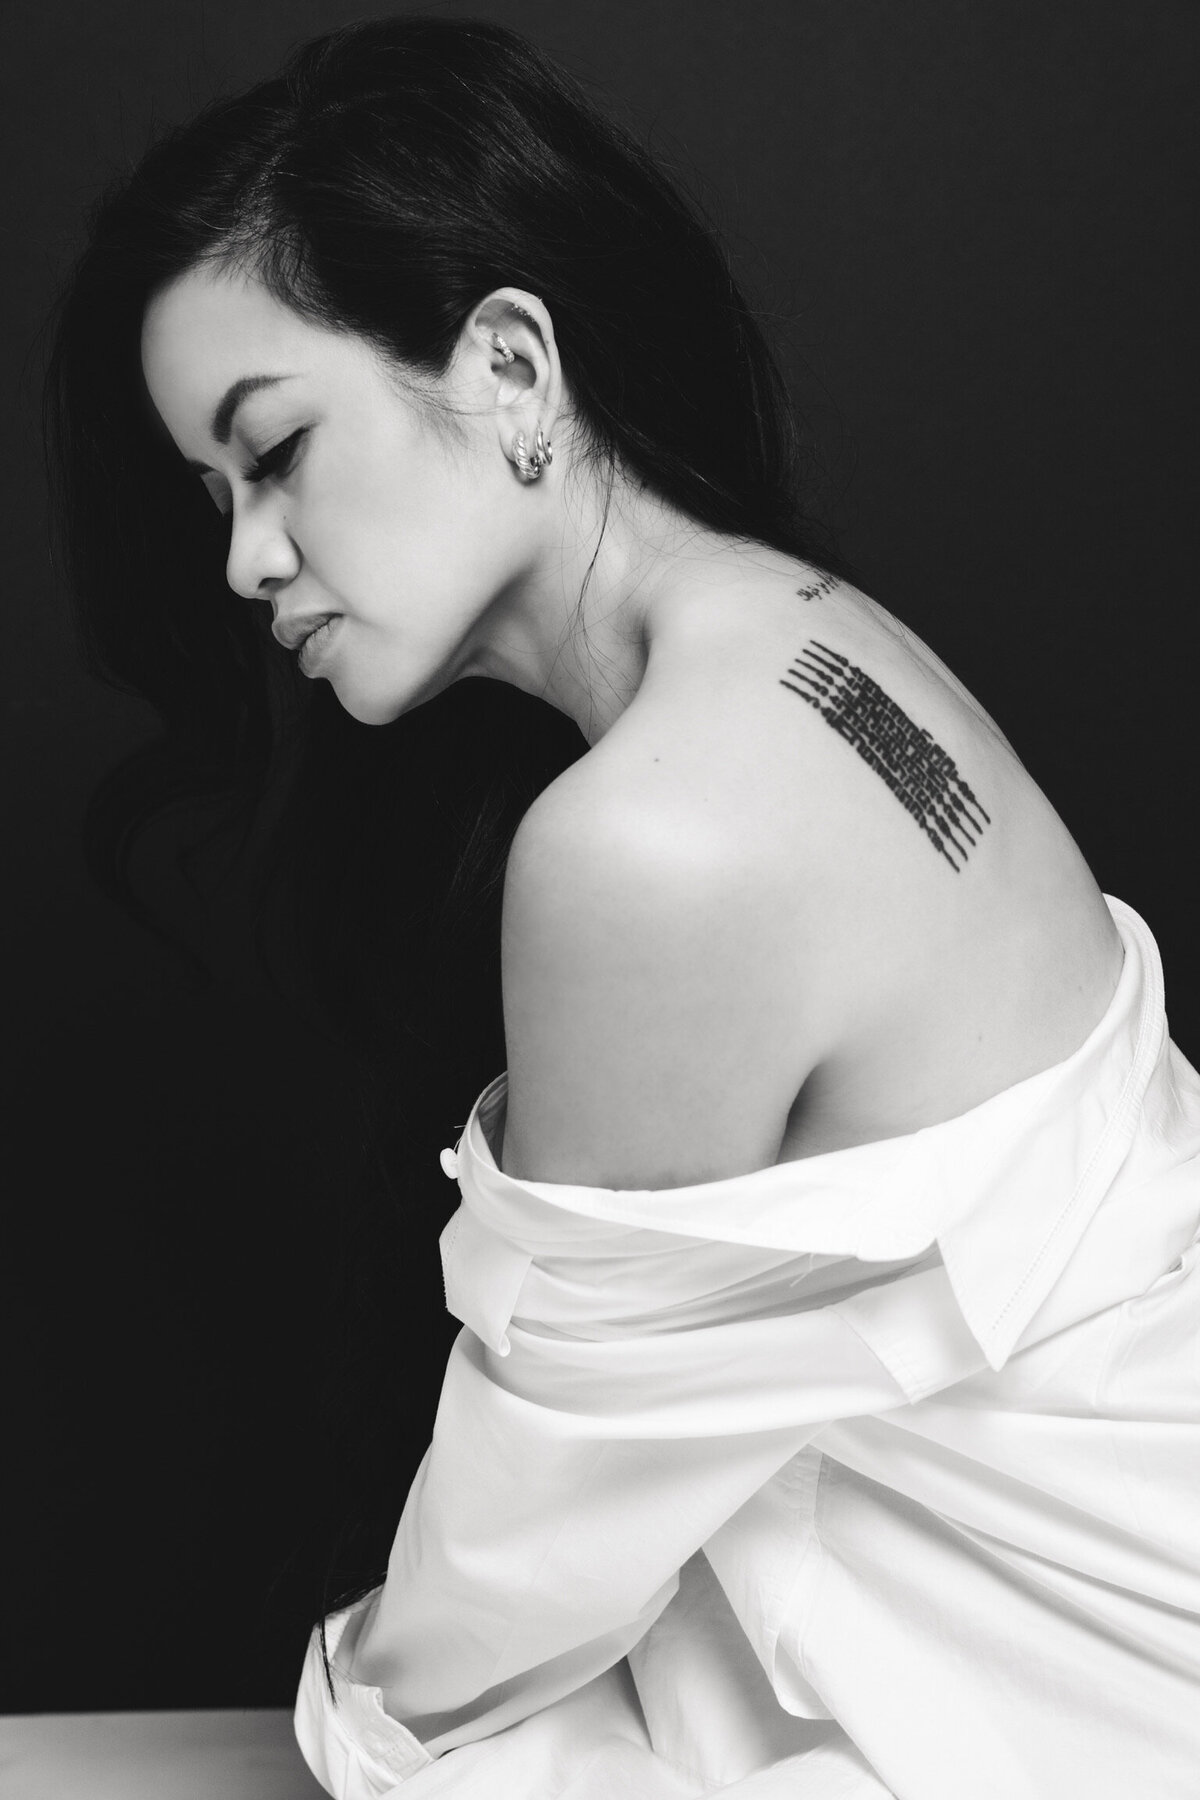 A black and white picture of a young Asian woman with a tattoo on her back.